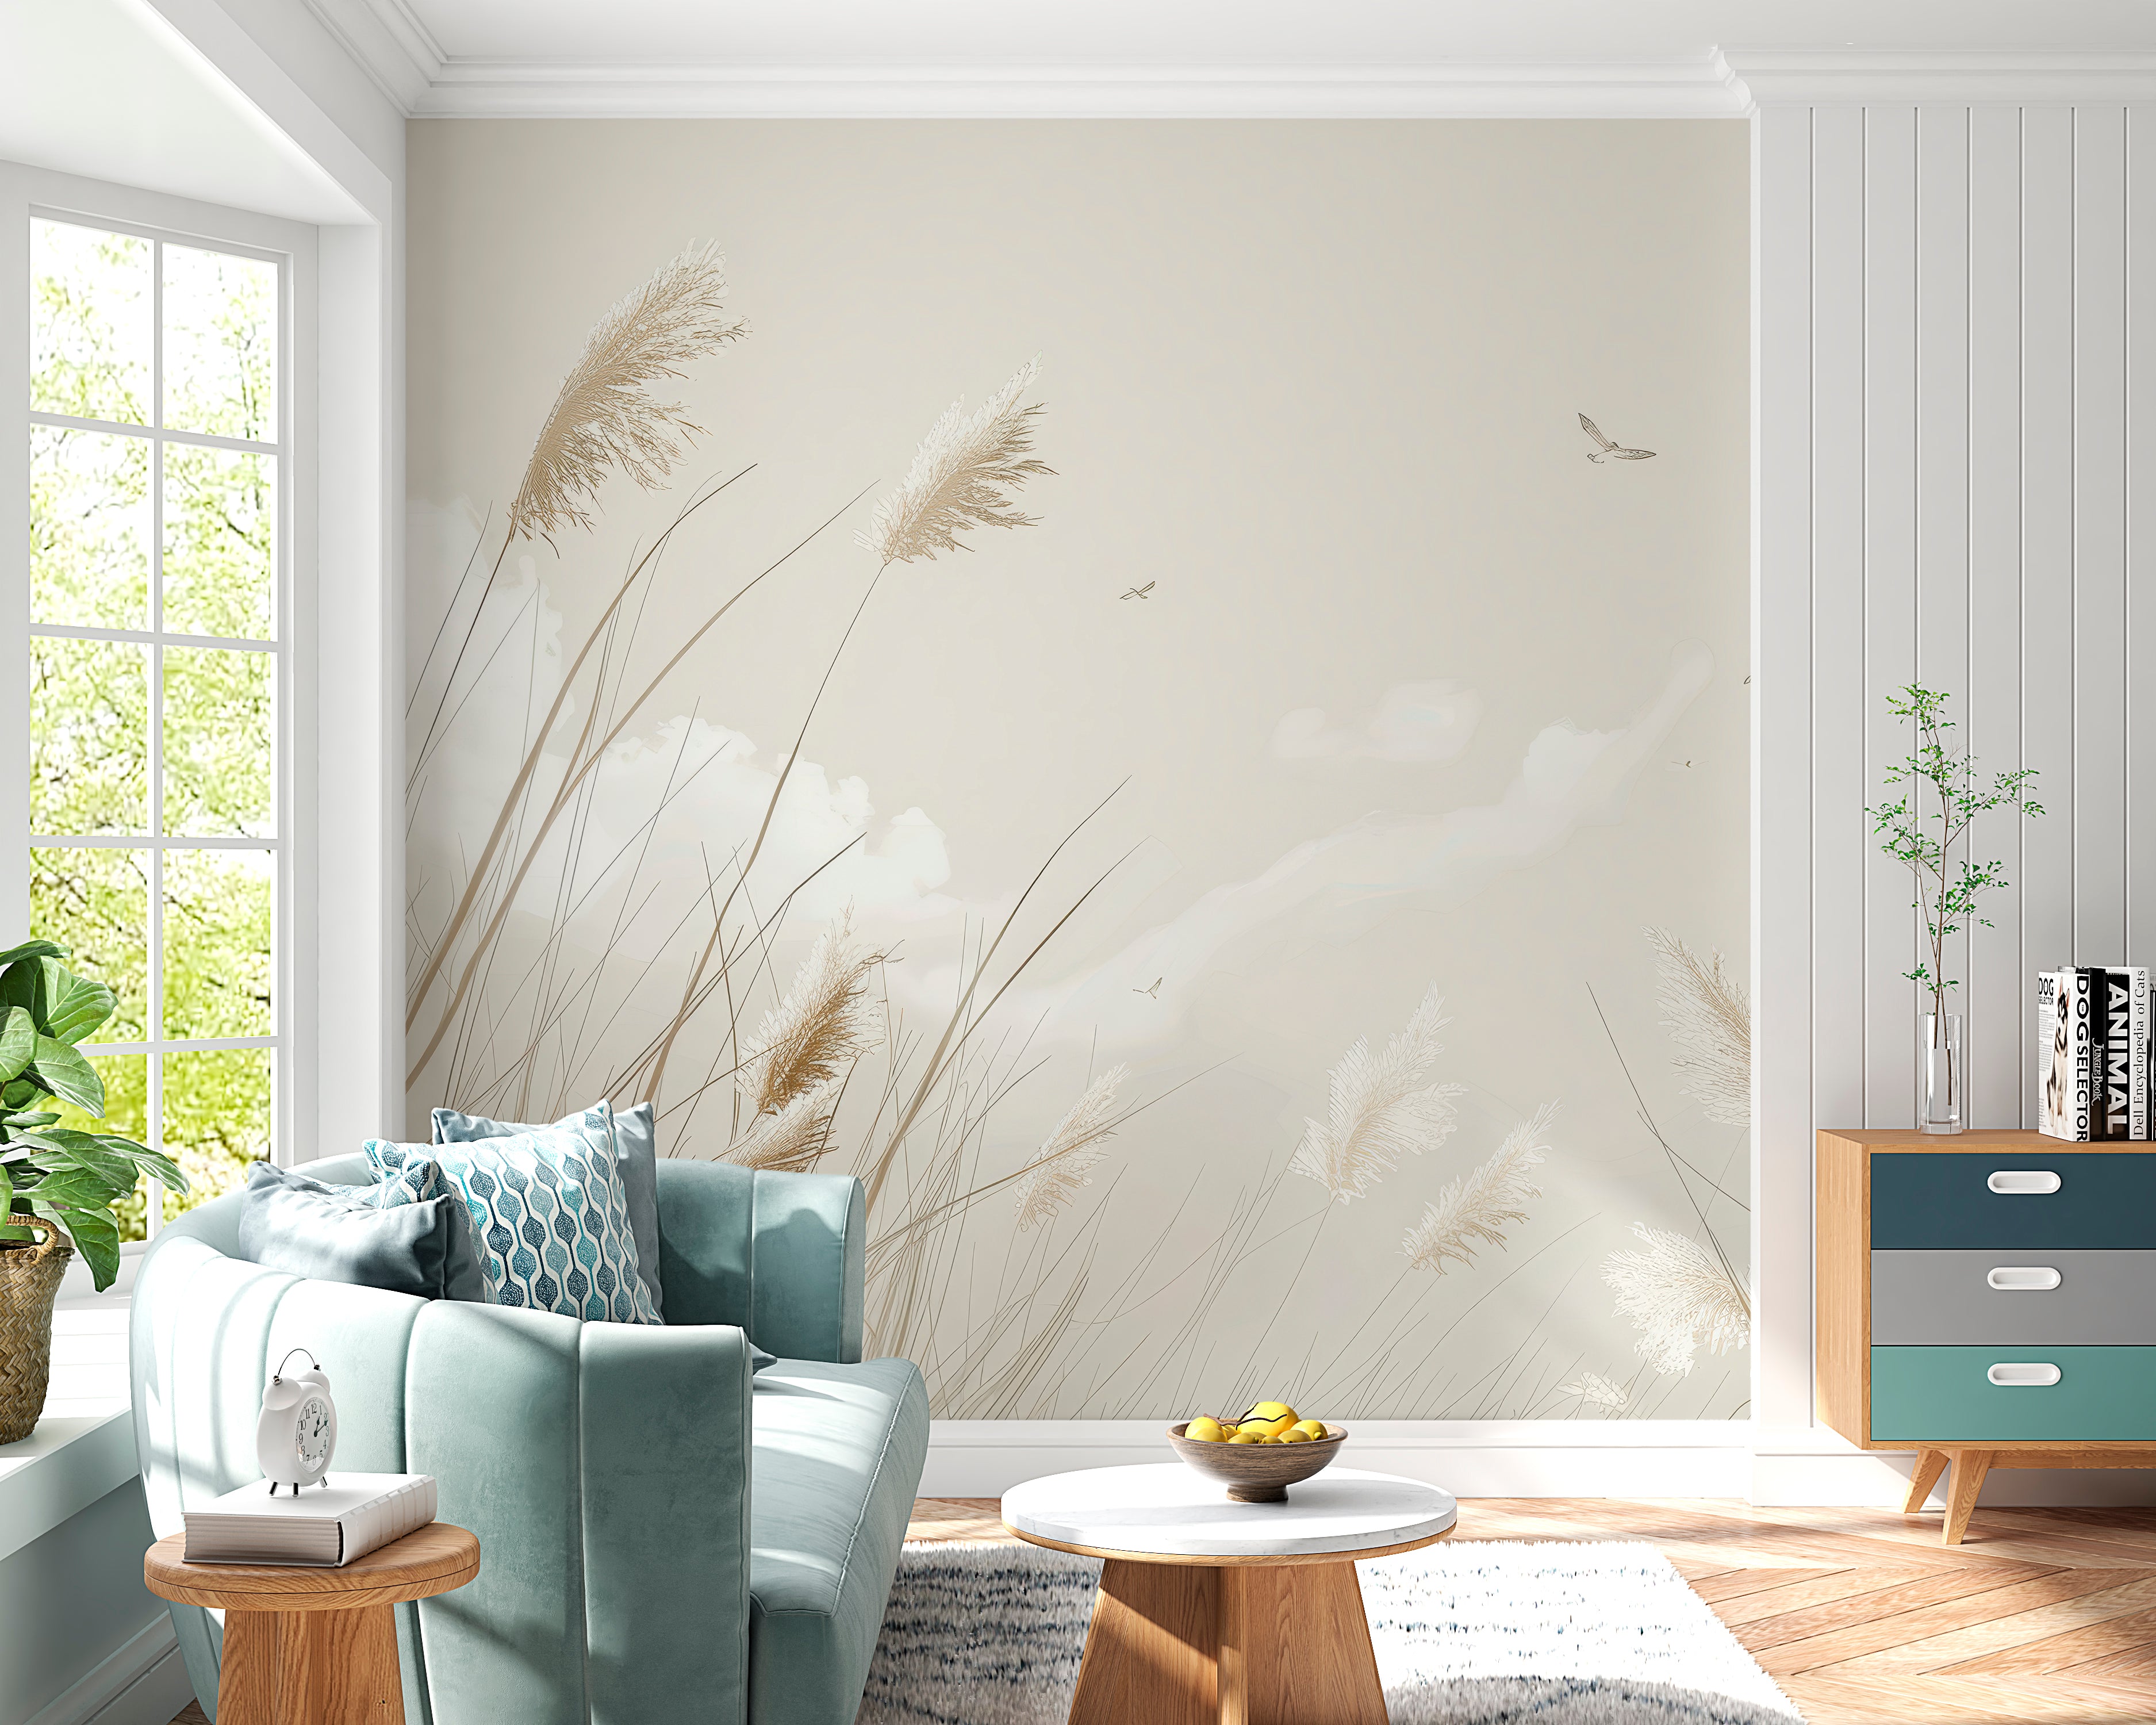 Natural Serenity: Wall Decoration with Wild Herbs